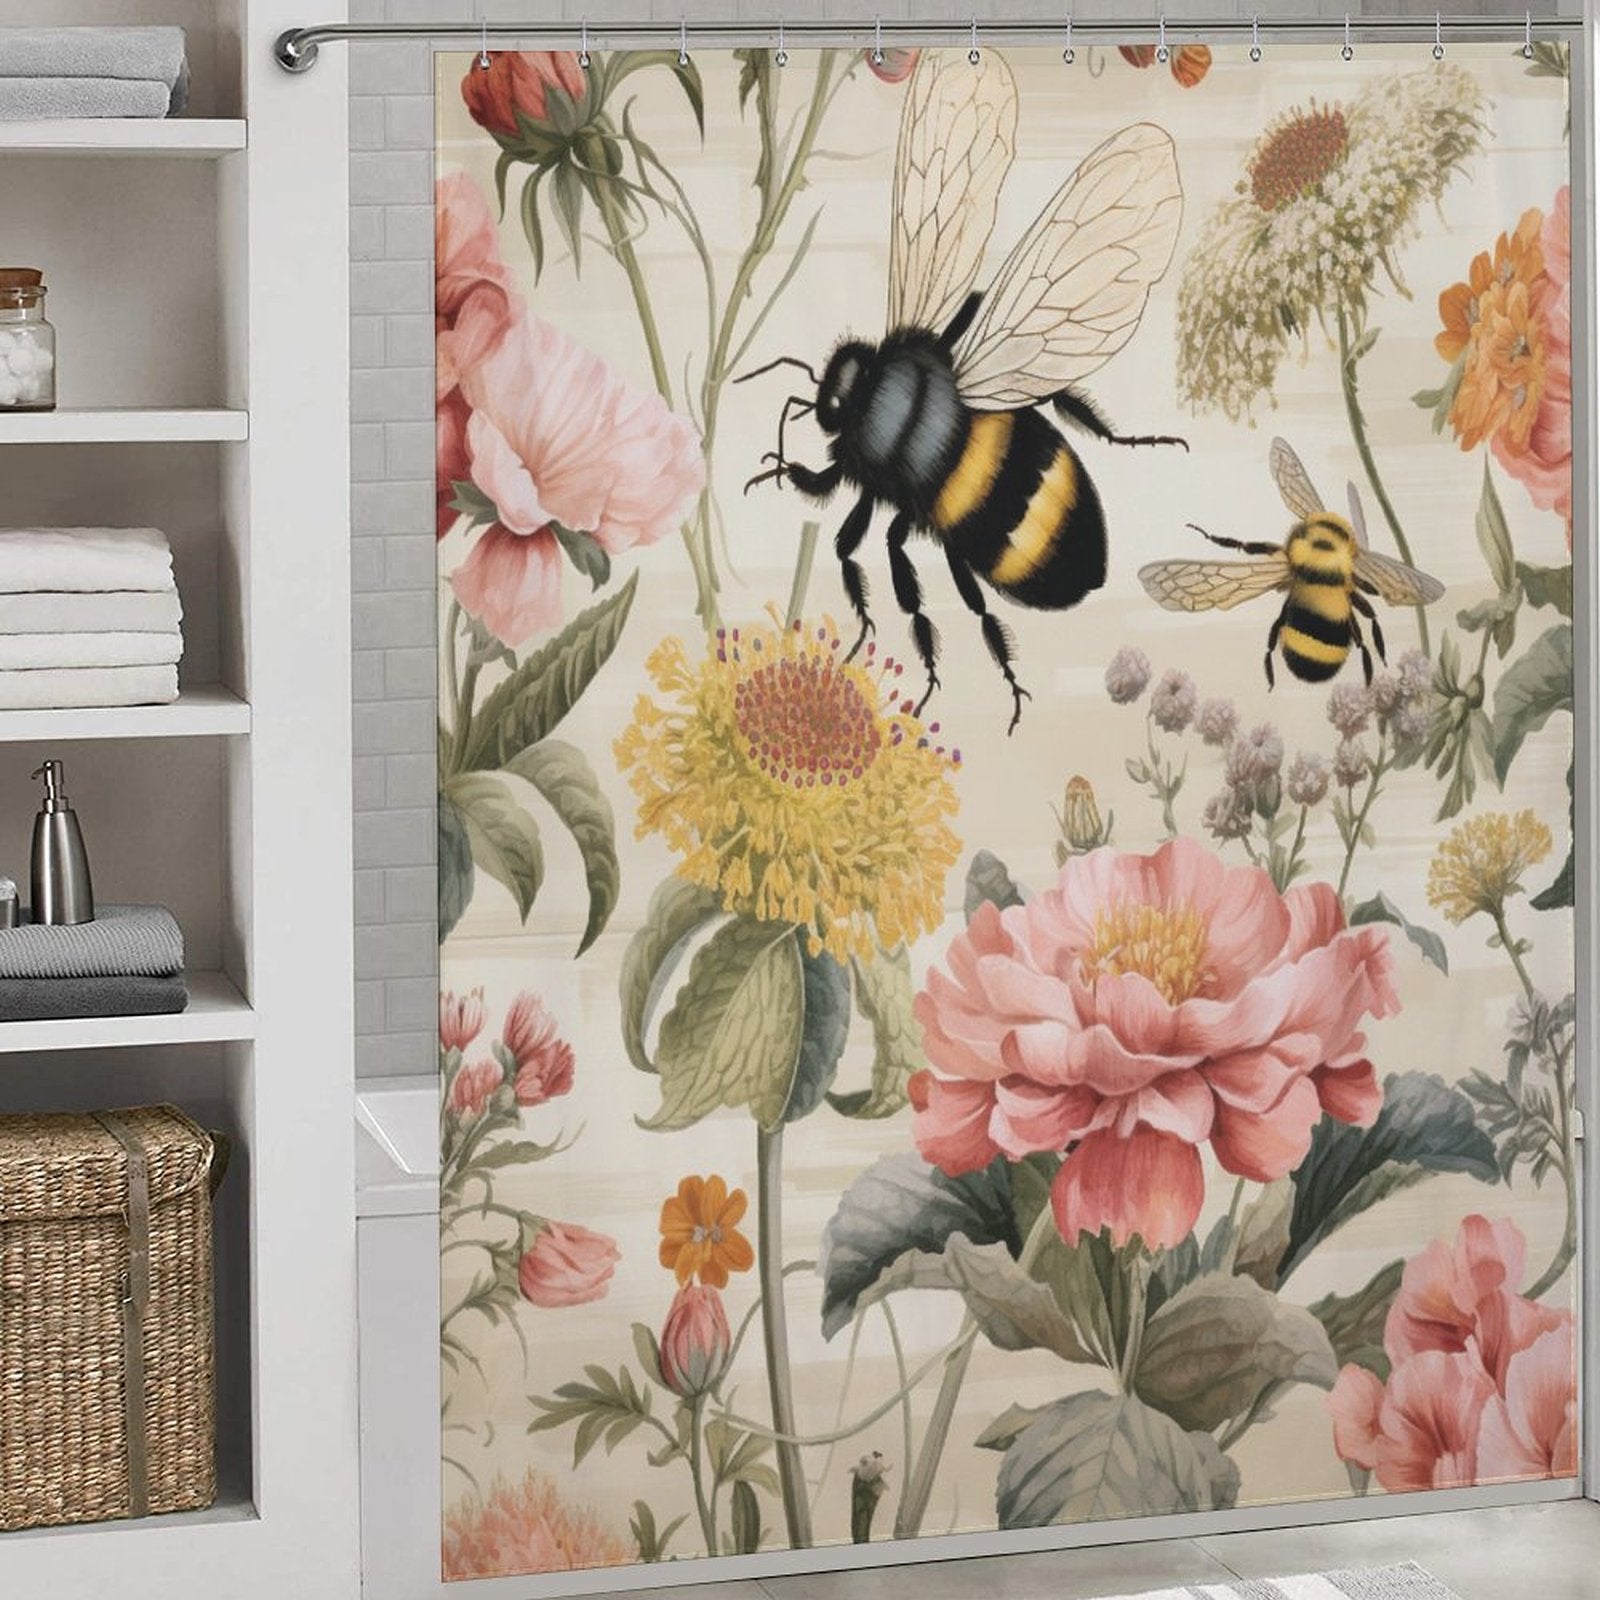 Buzzing Bumble Bee Shower Curtain